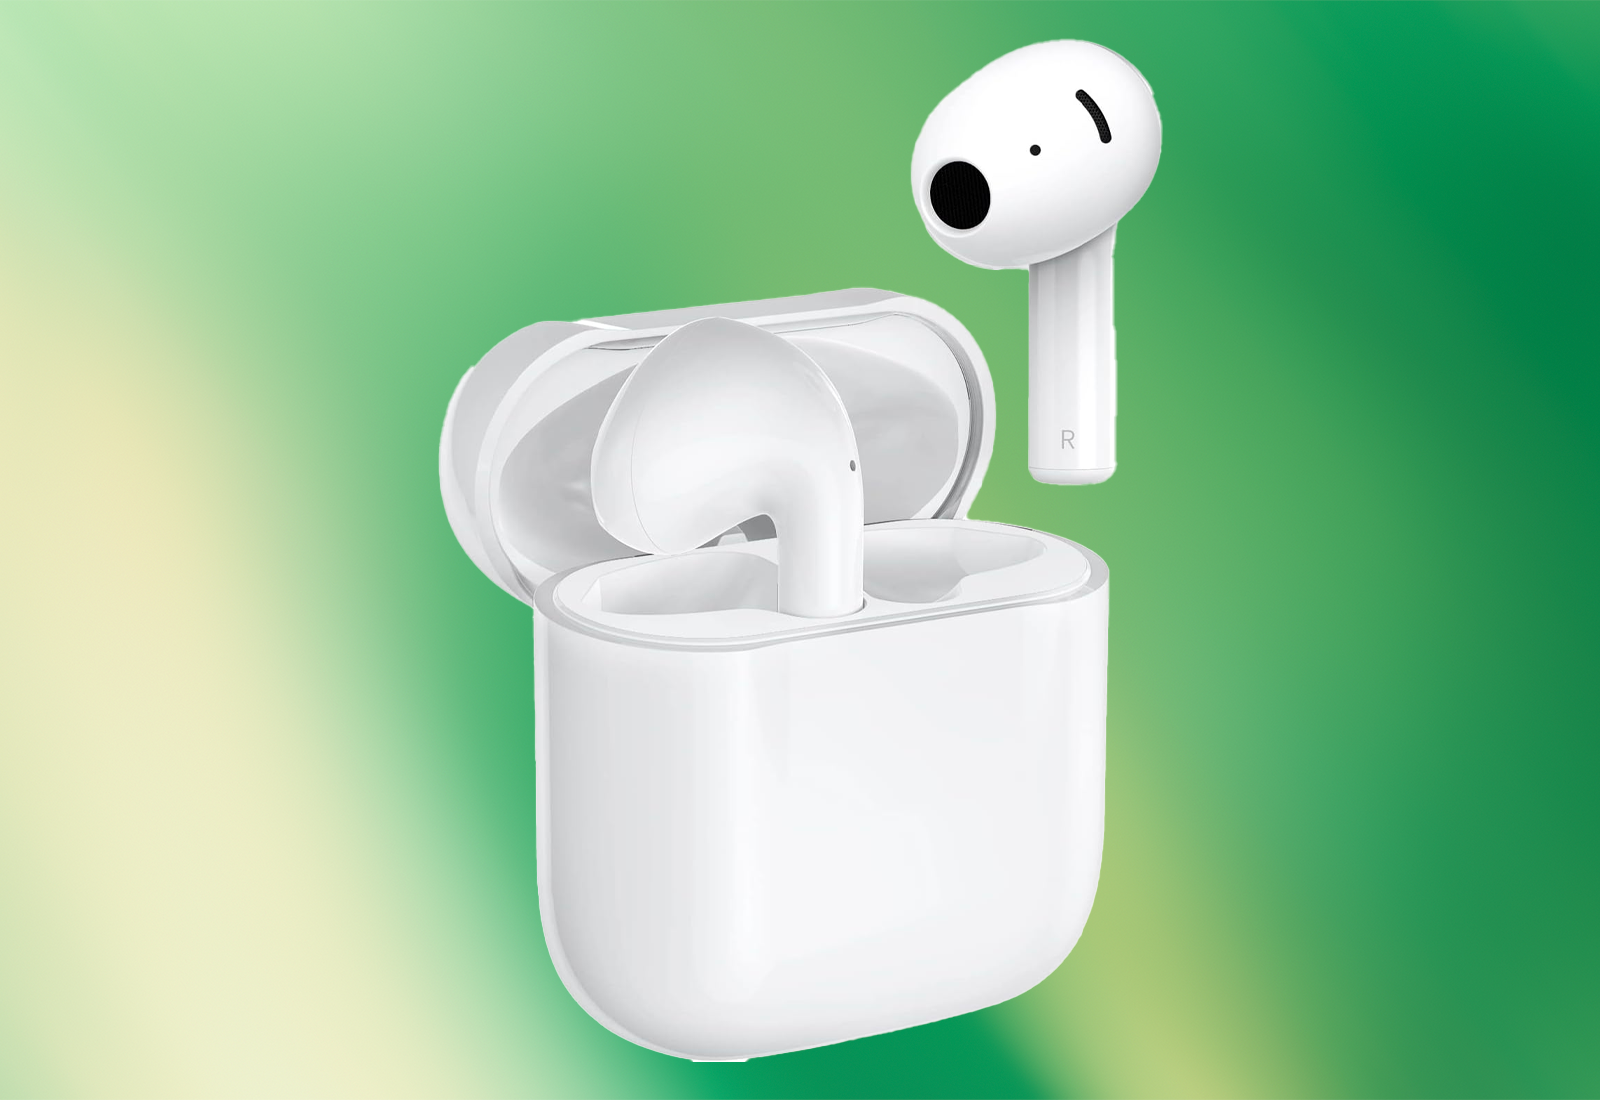 Fake AirPods Review - Should I Buy AirPod Knockoffs?